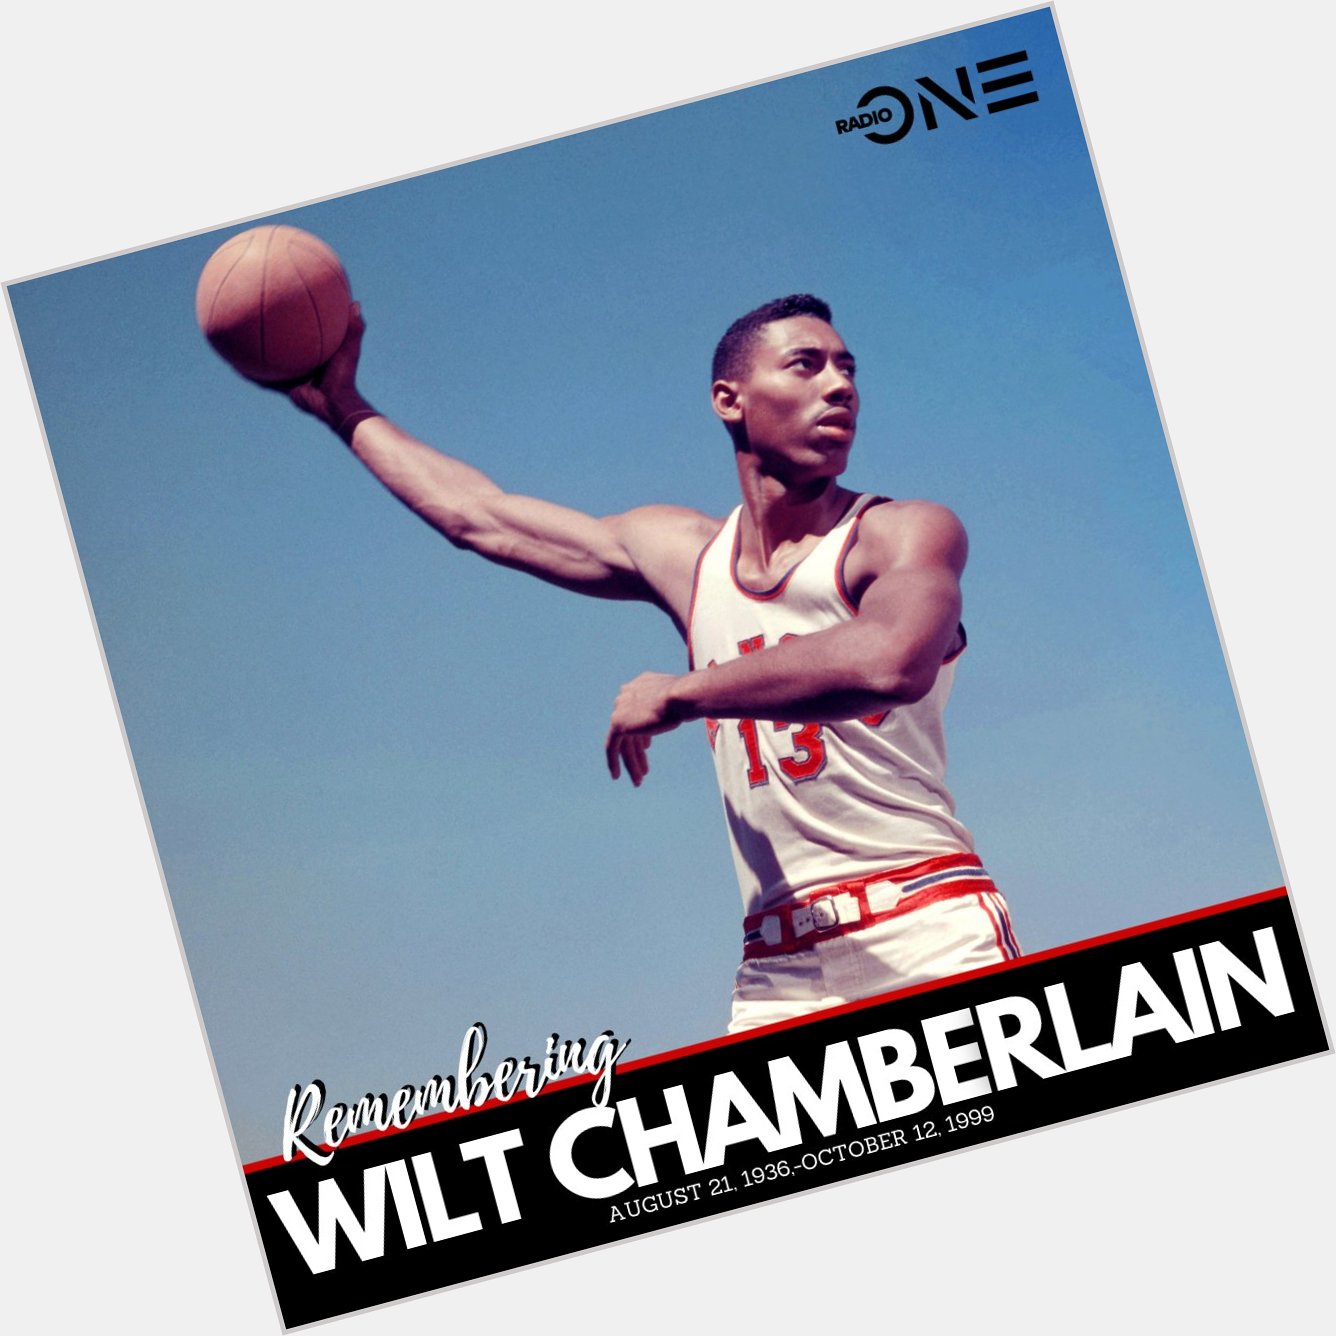 The legendary Wilt Chamberlain would have been 85 years old today. Happy Heavenly Birthday 